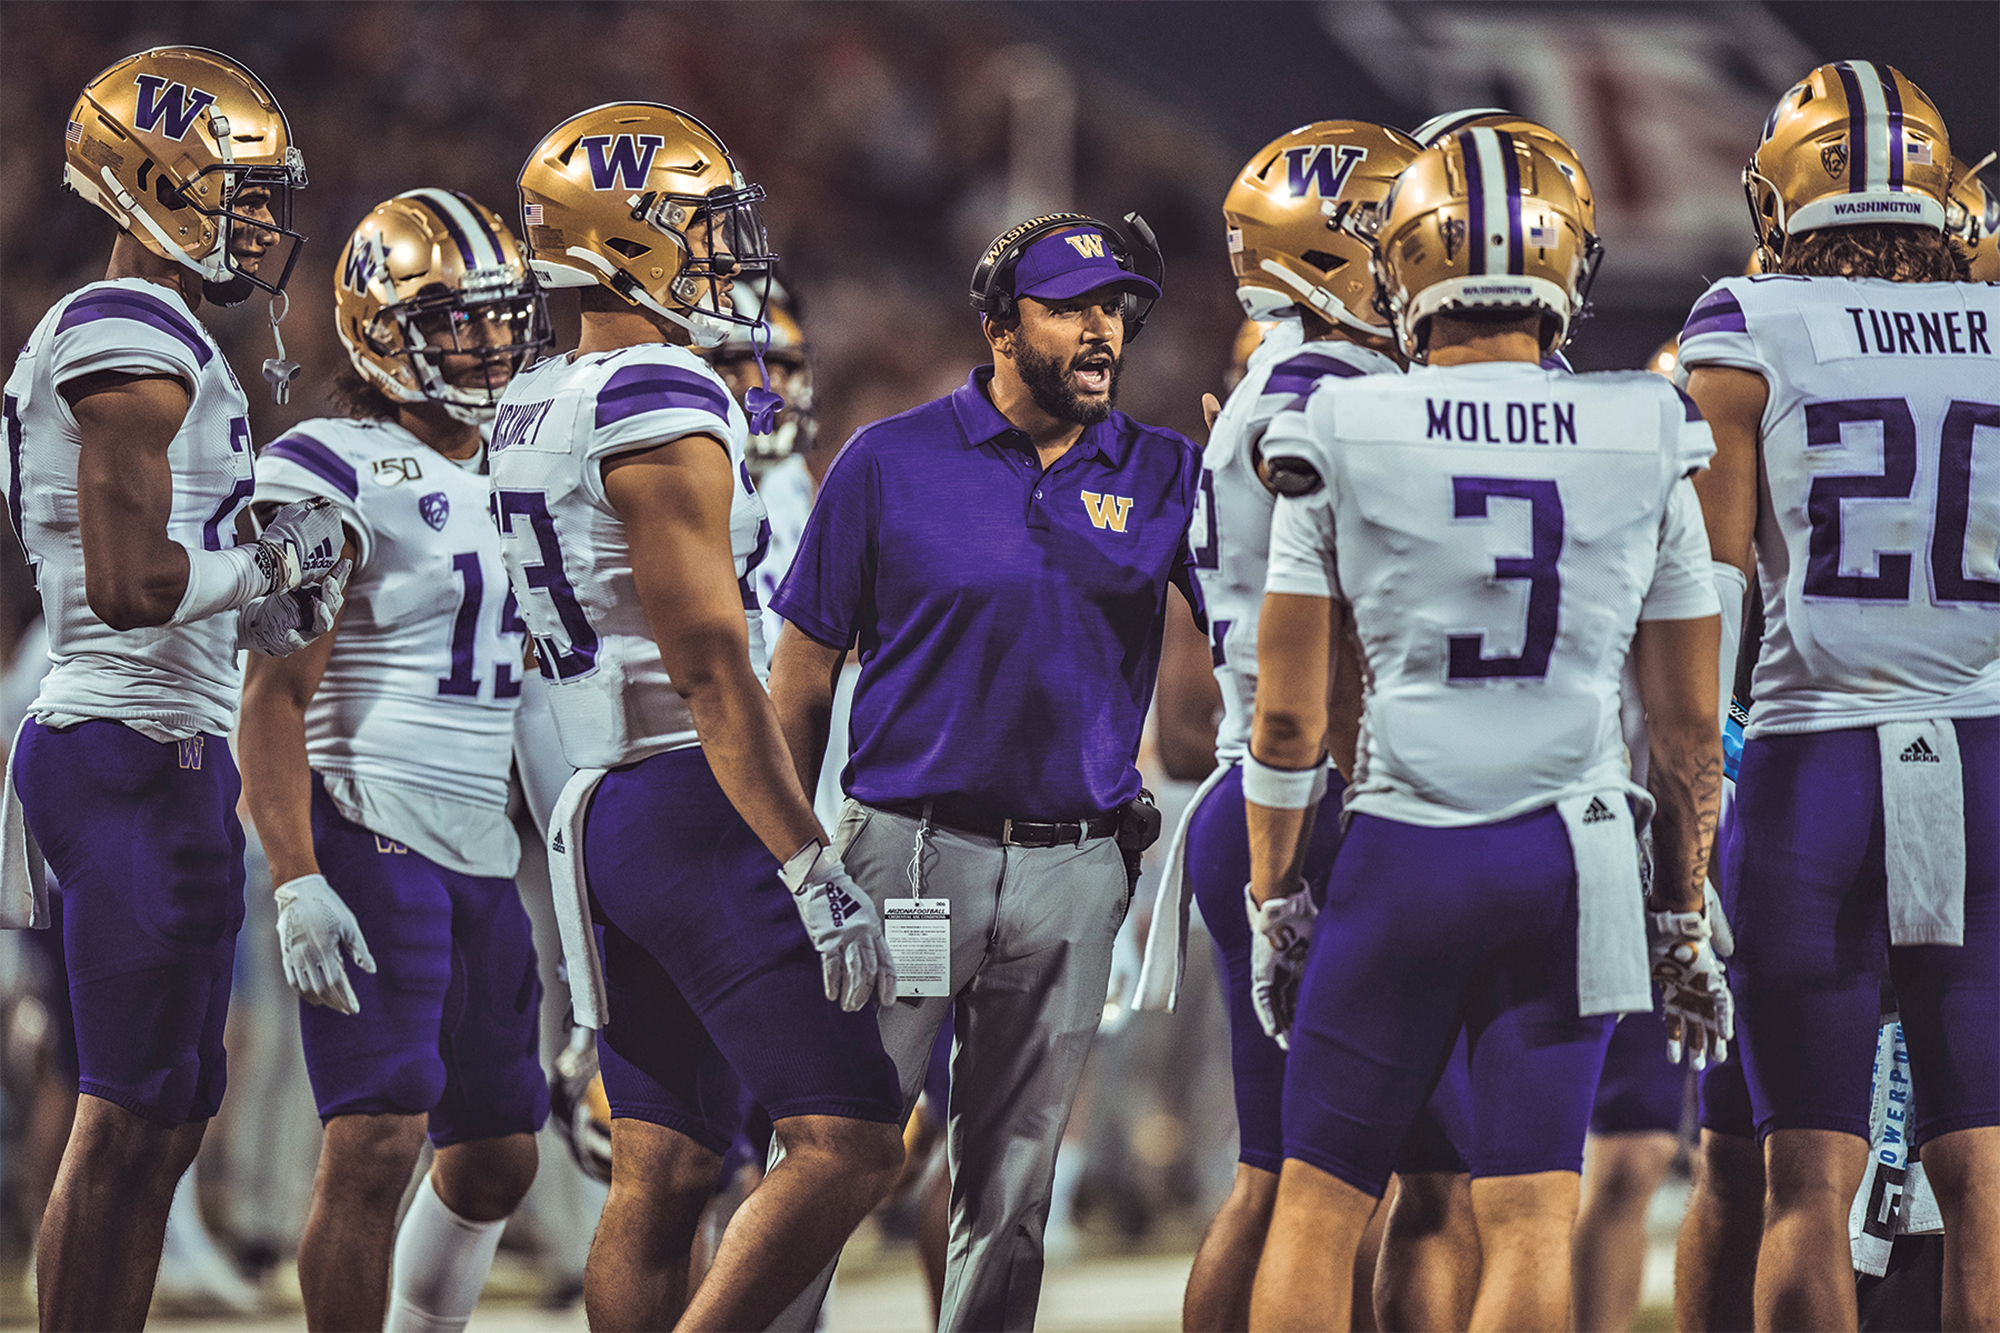 For Jimmy Lake, coaching Husky football is a dream come true UW Magazine — University of